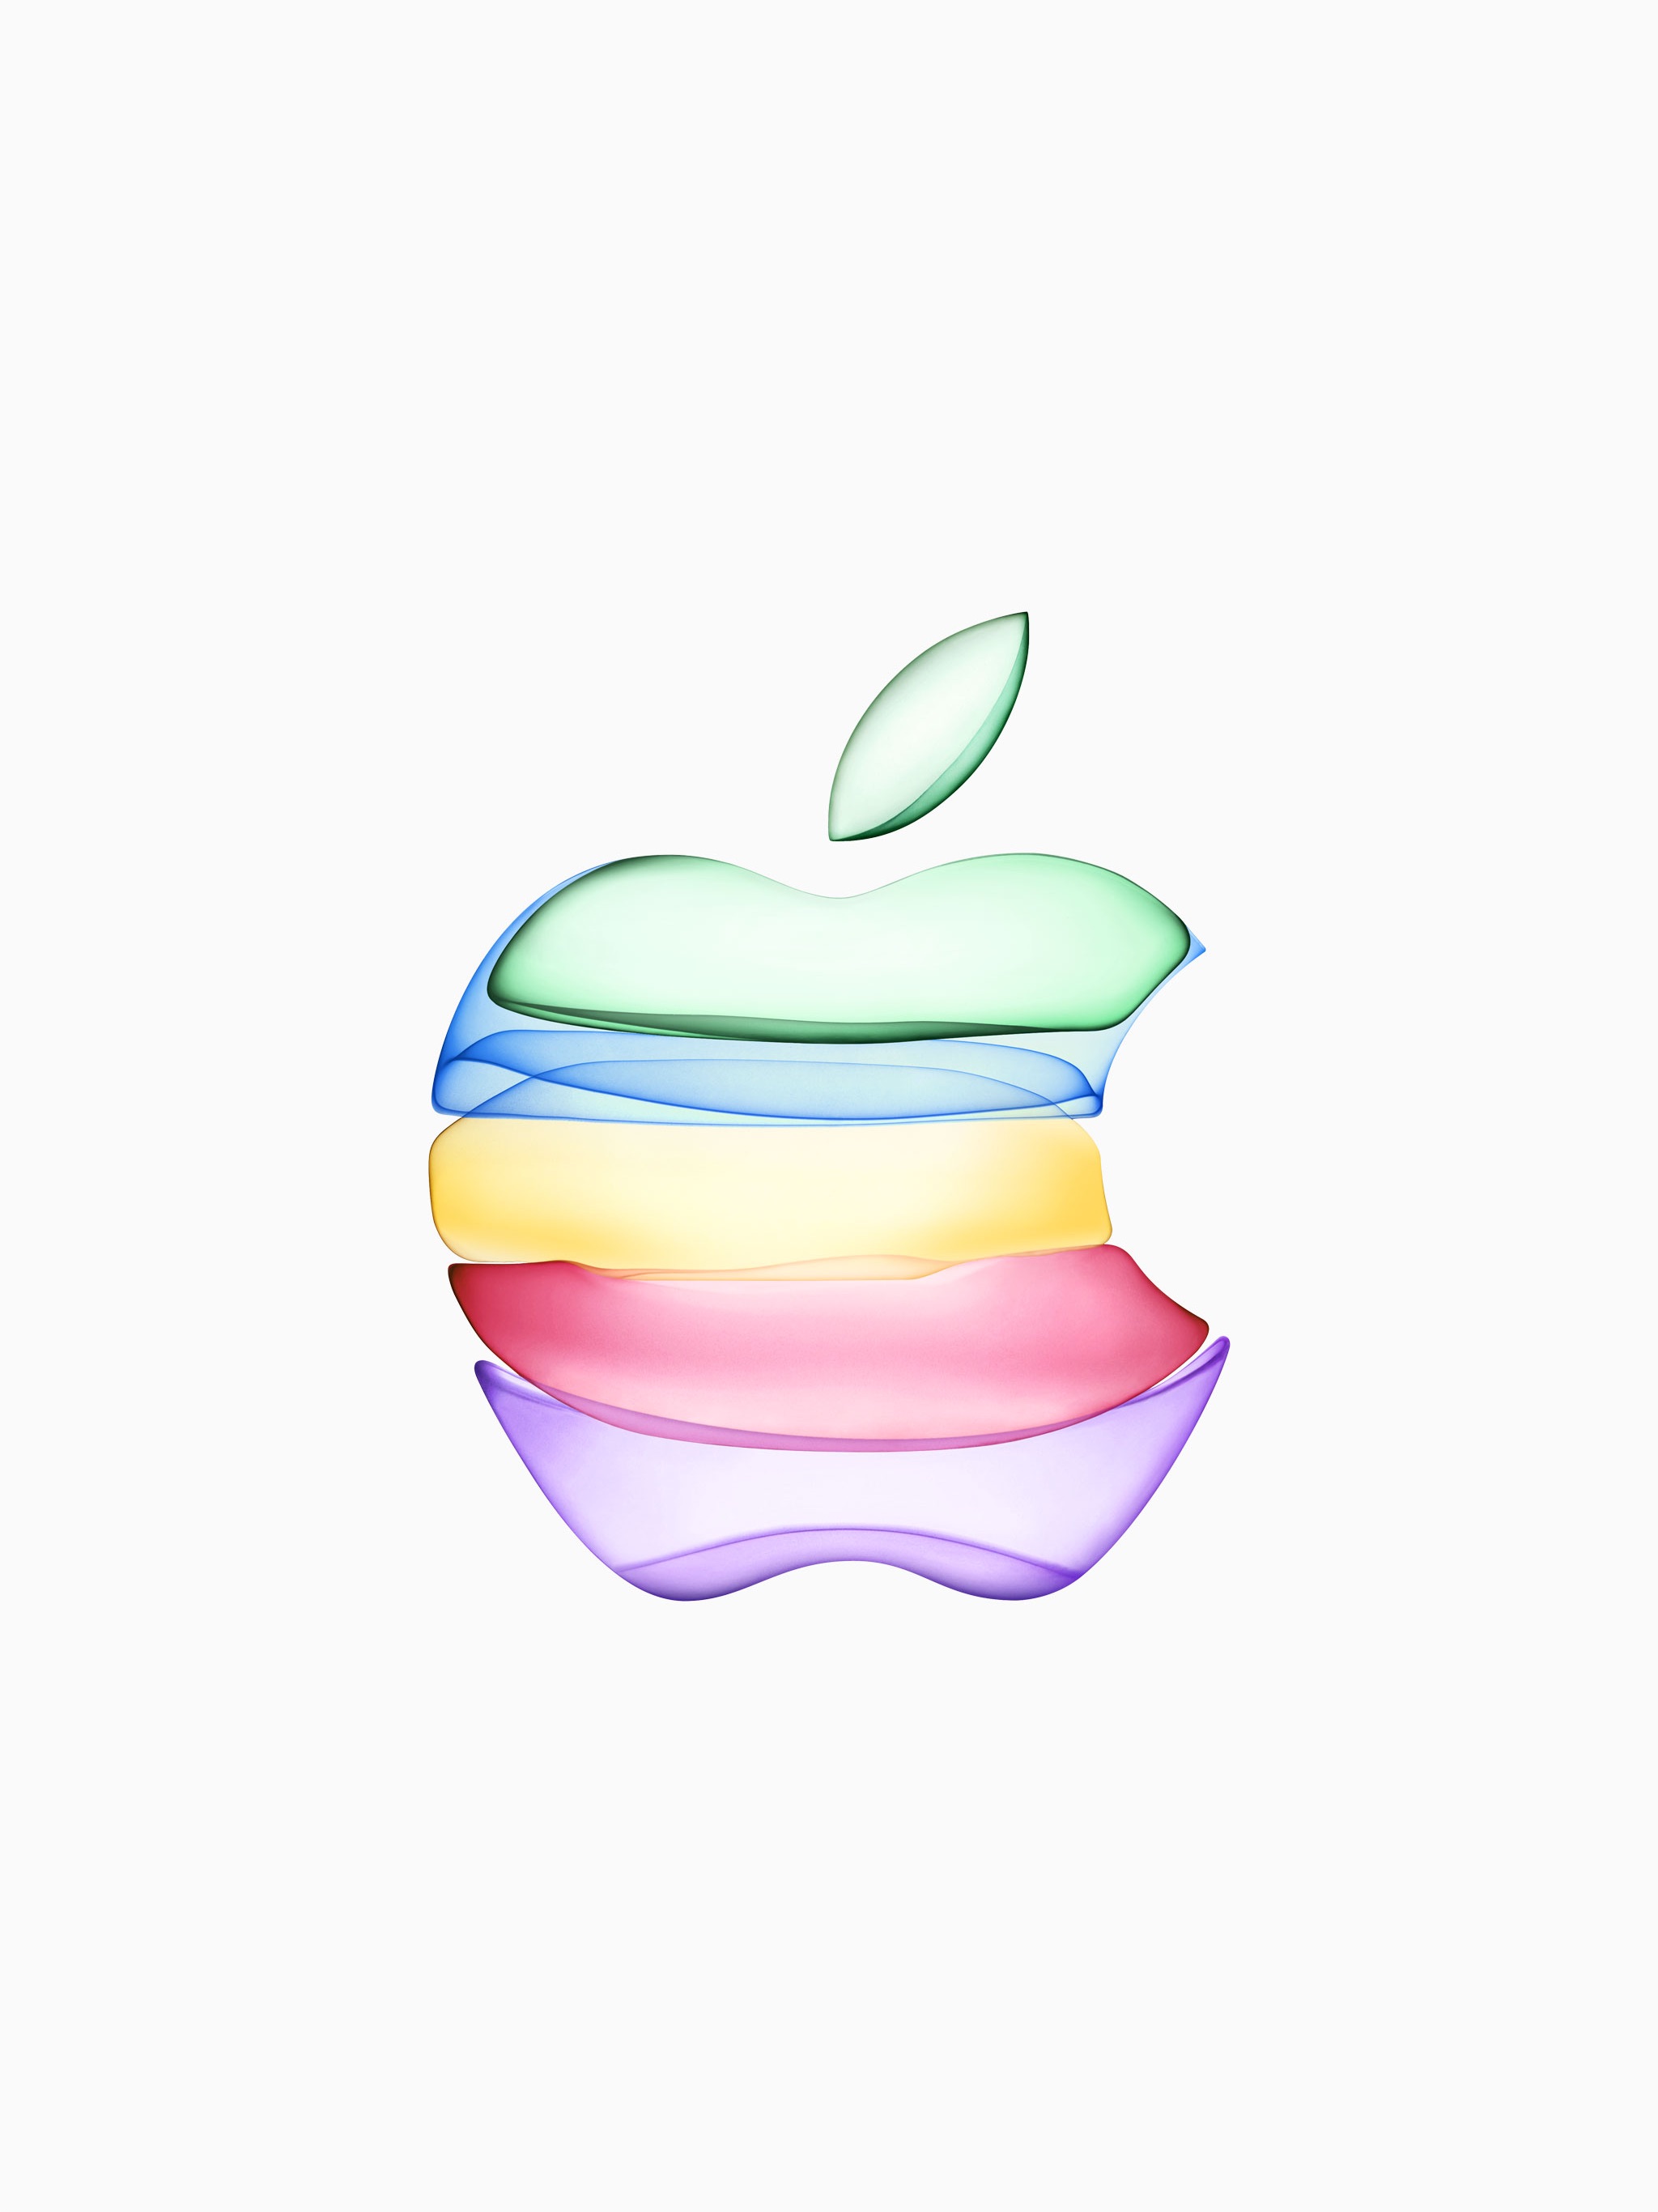 Download iPhone 11 Event Apple Logo Wallpapers For iPhone, iPad And Mac -  iOS Hacker